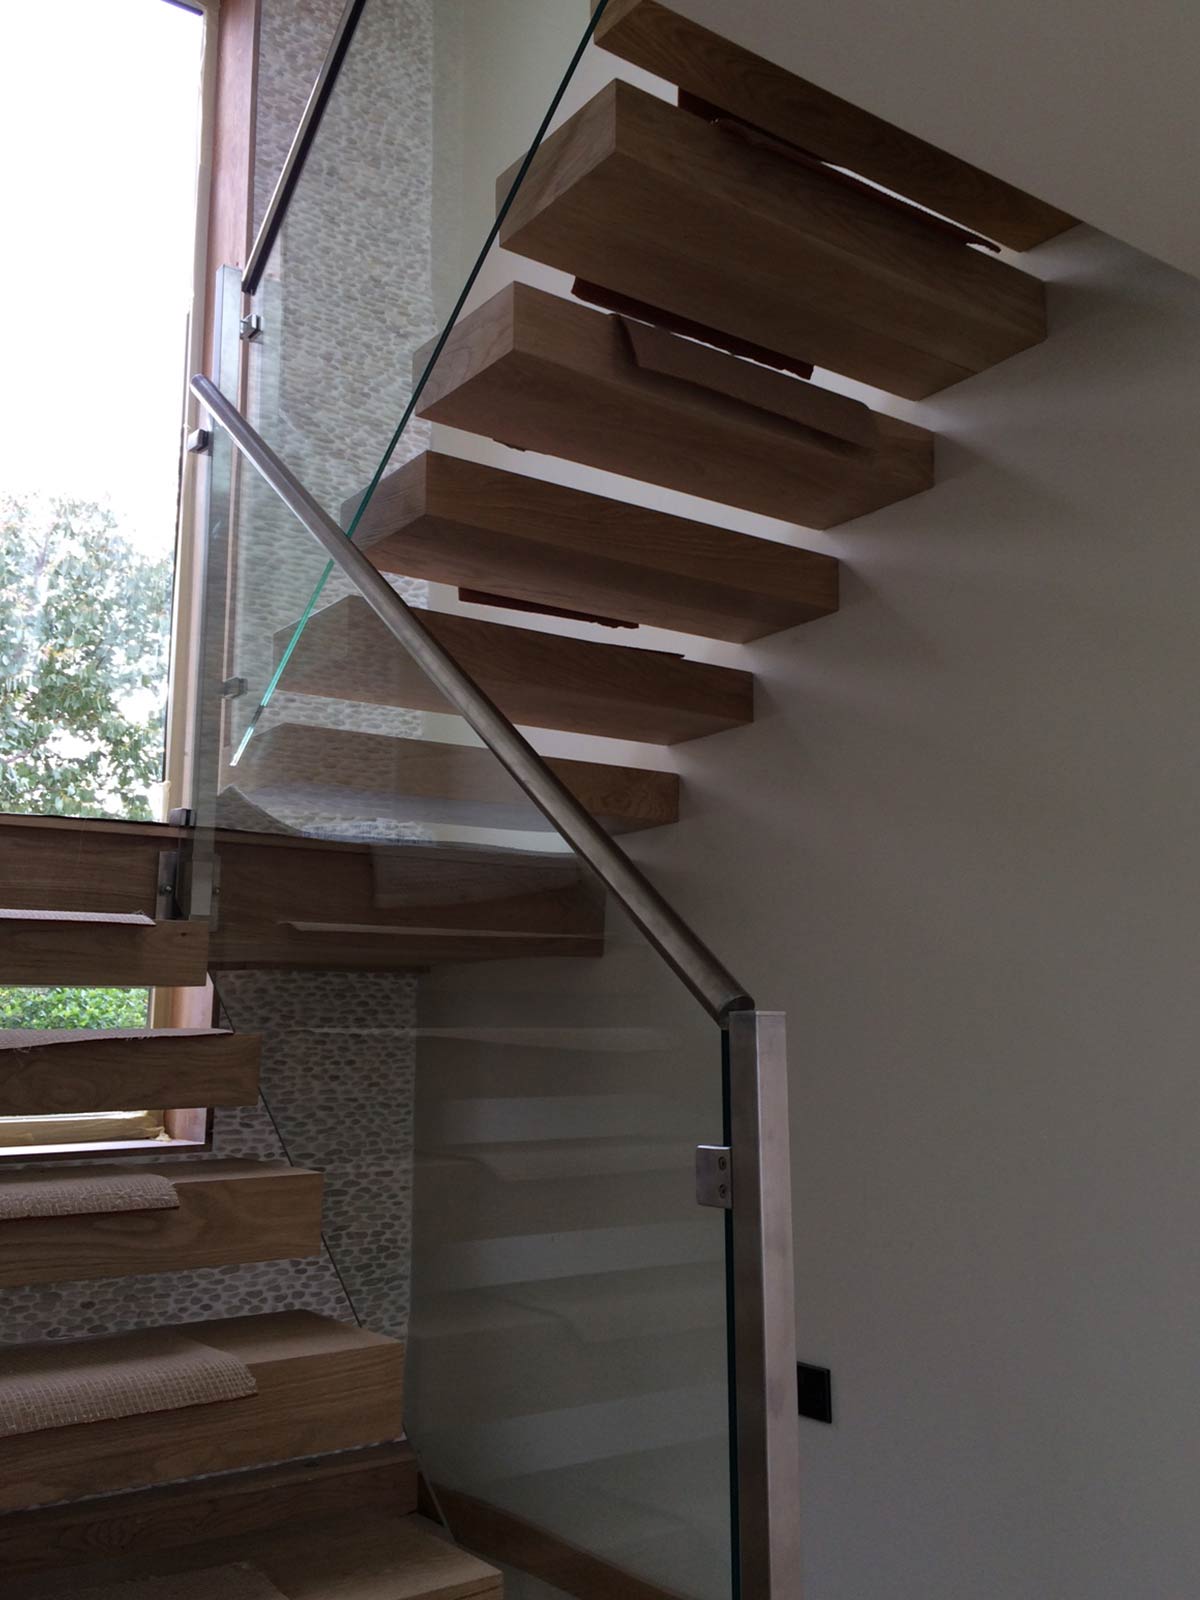 staircase glass balustrades with handrail